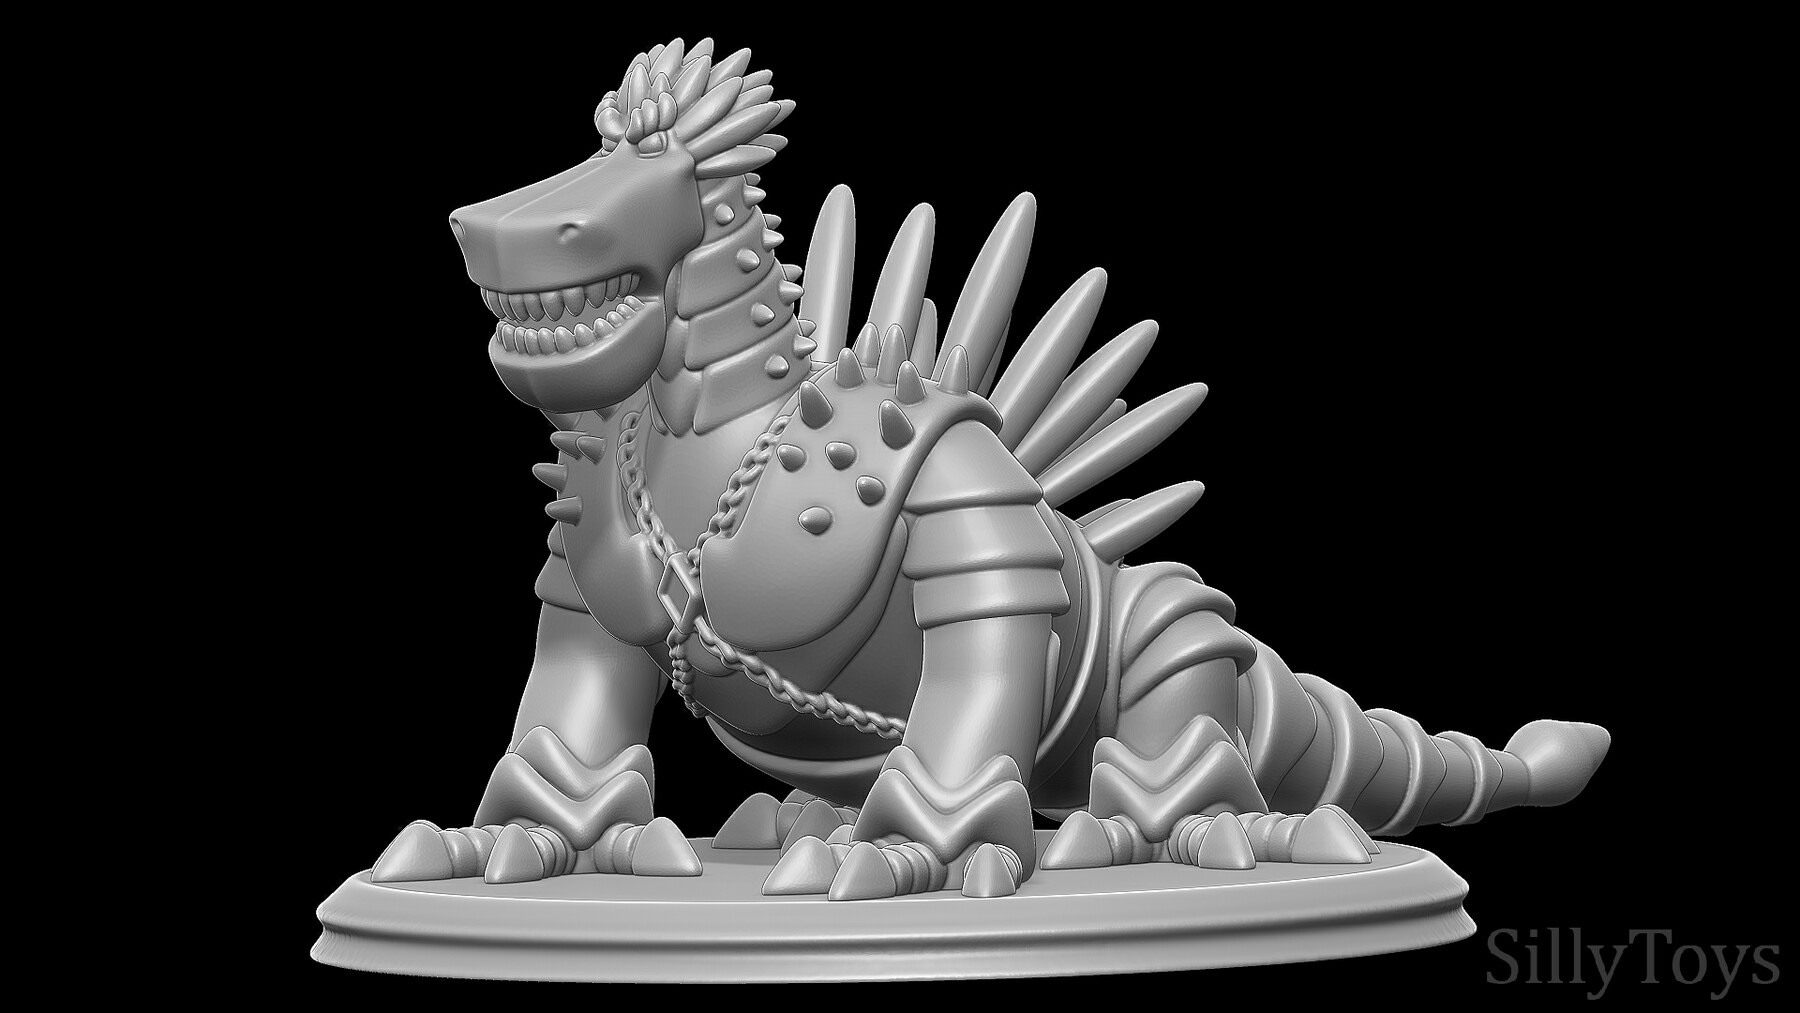 Dragon Rider 3D cartoon character in Blender (fully) - Finished